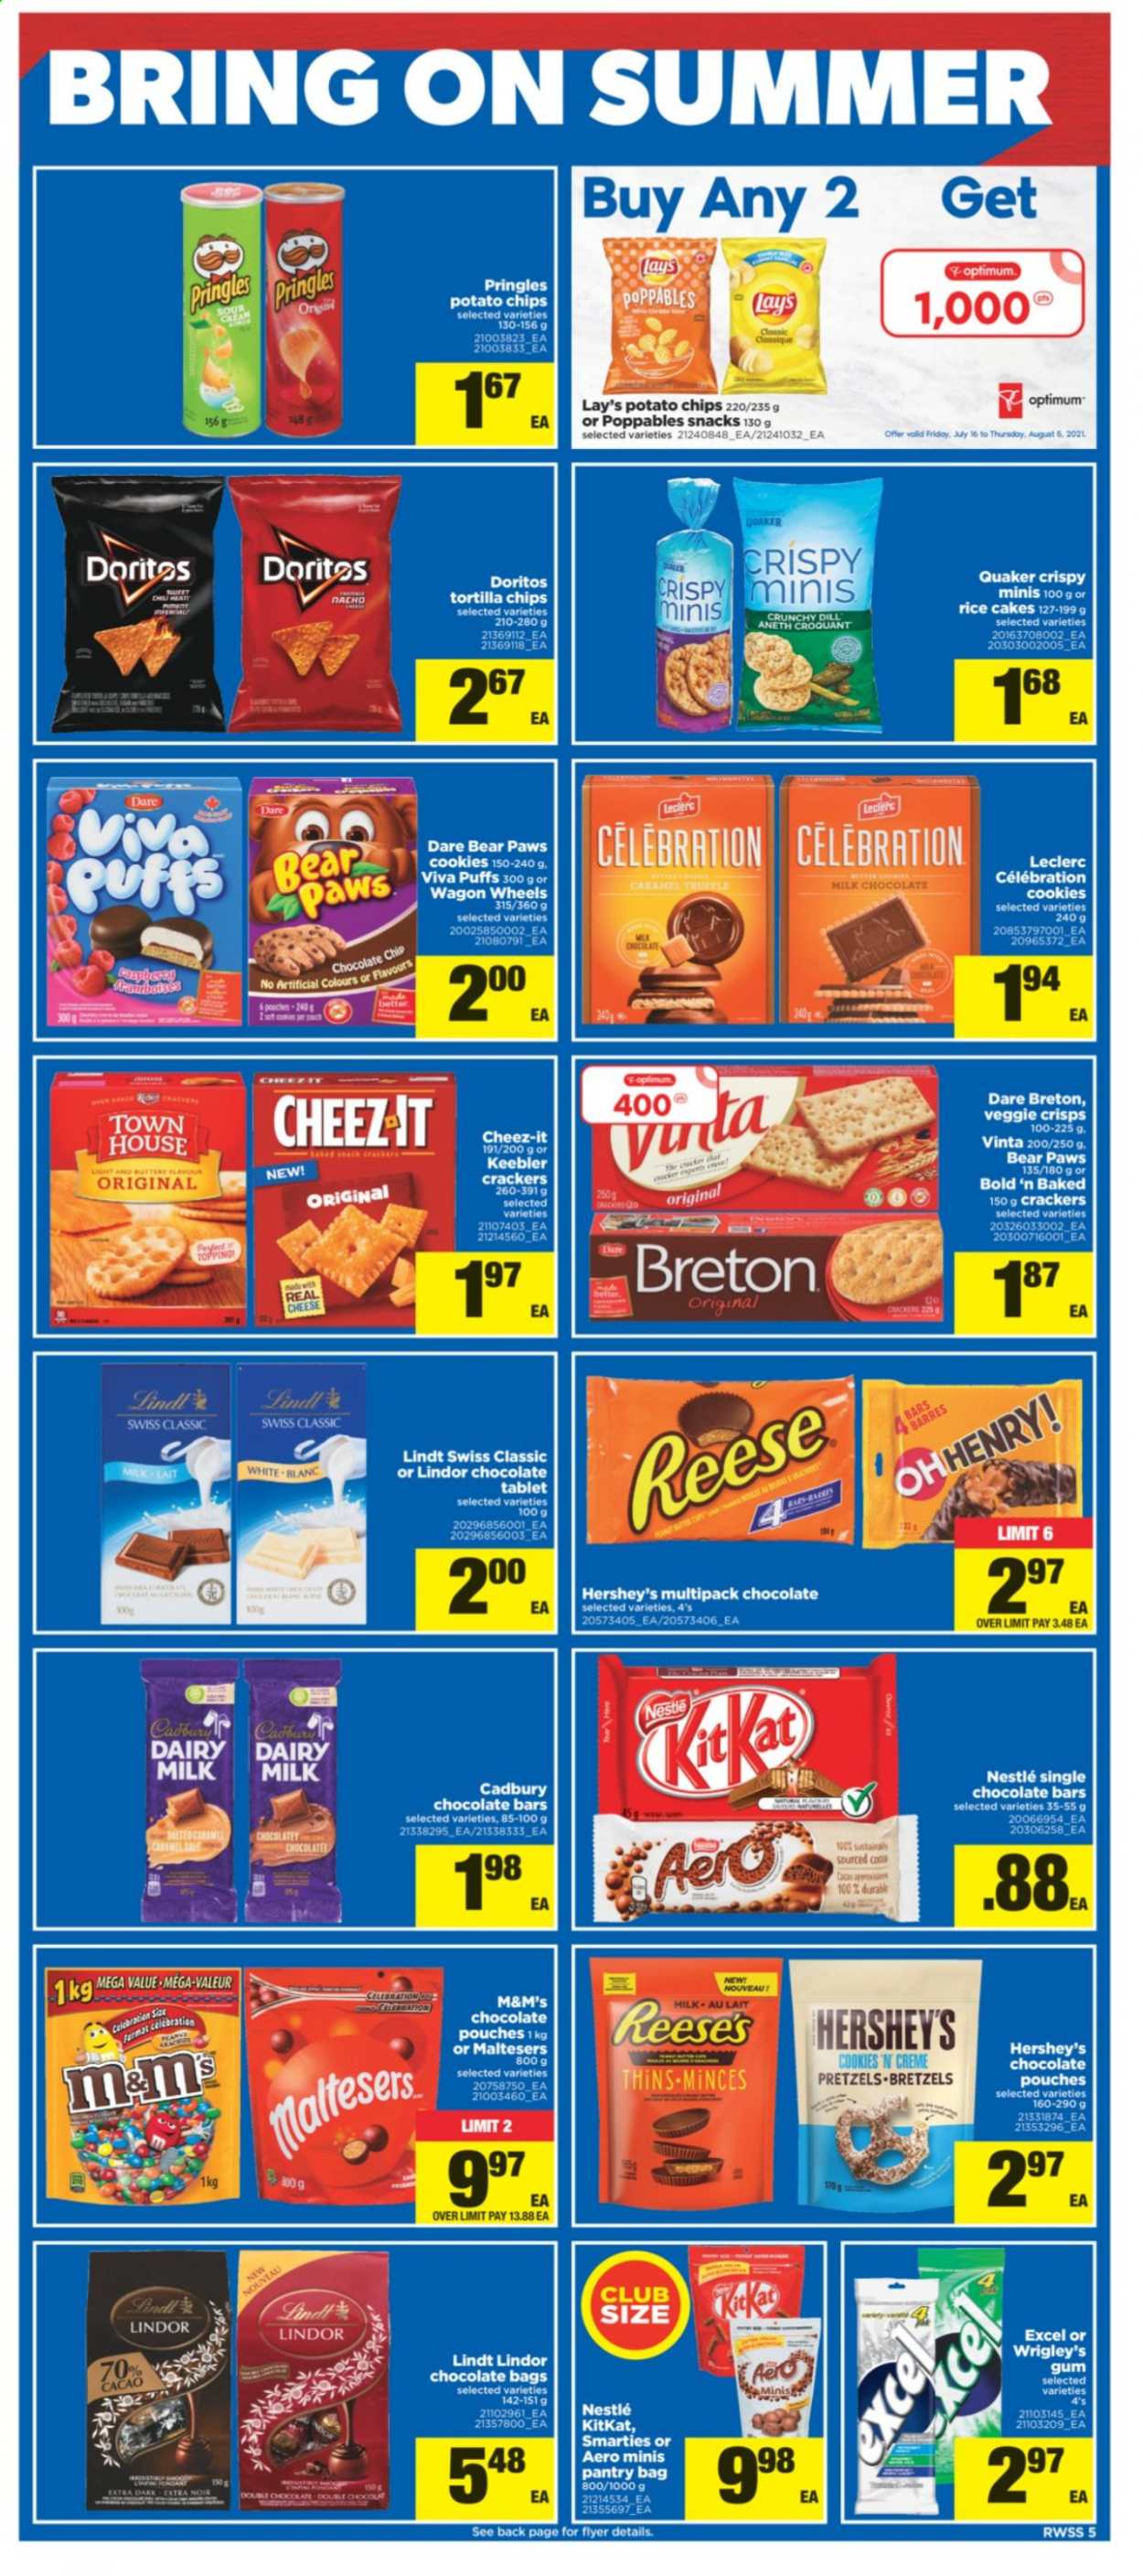 thumbnail - Real Canadian Superstore Flyer - July 23, 2021 - July 29, 2021 - Sales products - tablet, pretzels, puffs, Quaker, cheese, Reese's, Hershey's, cookies, milk chocolate, snack, KitKat, Celebration, crackers, Maltesers, Cadbury, Dairy Milk, Keebler, chocolate bar, Doritos, tortilla chips, potato chips, Pringles, Lay’s, Thins, Cheez-It, topping, dill, Paws, Optimum, wagon, Nestlé, chips, M&M's. Page 5.